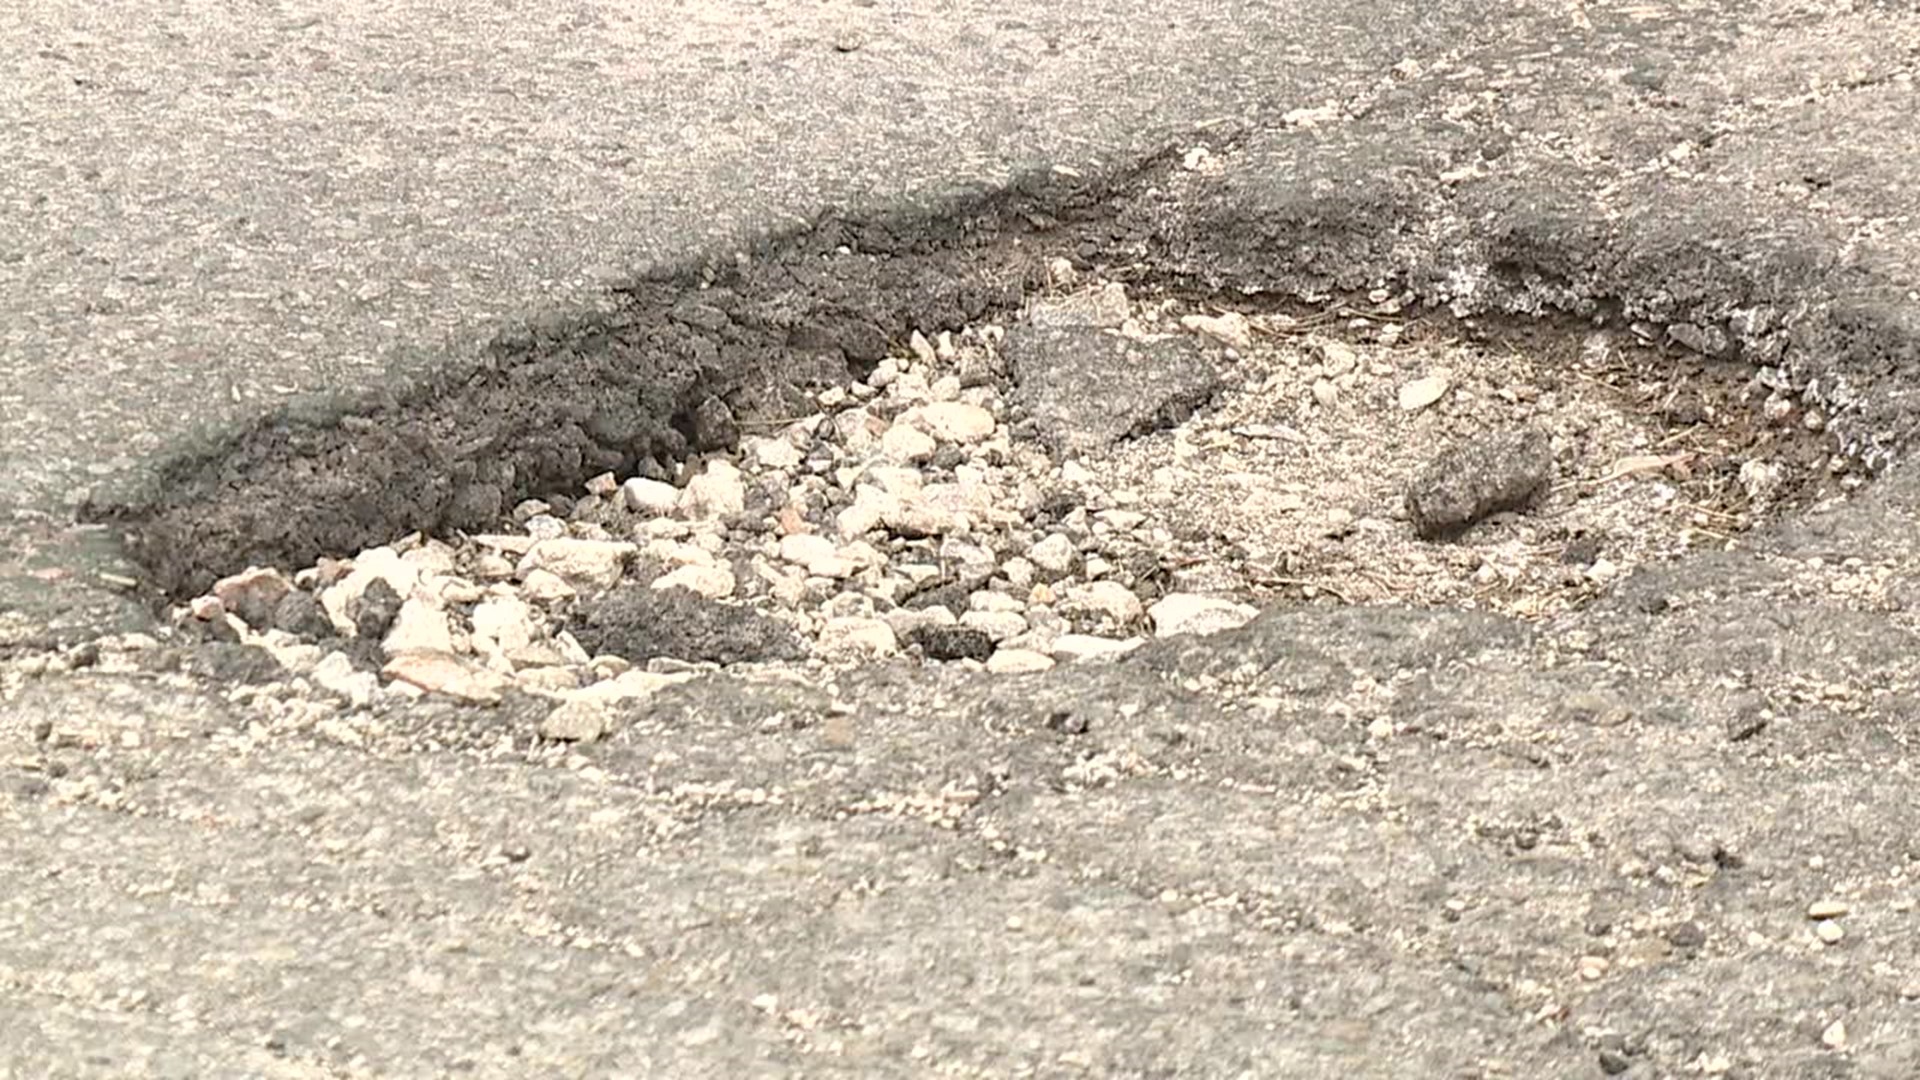 Is there a pothole ruining your commute? There's now a hotline to report it if it's in the city.